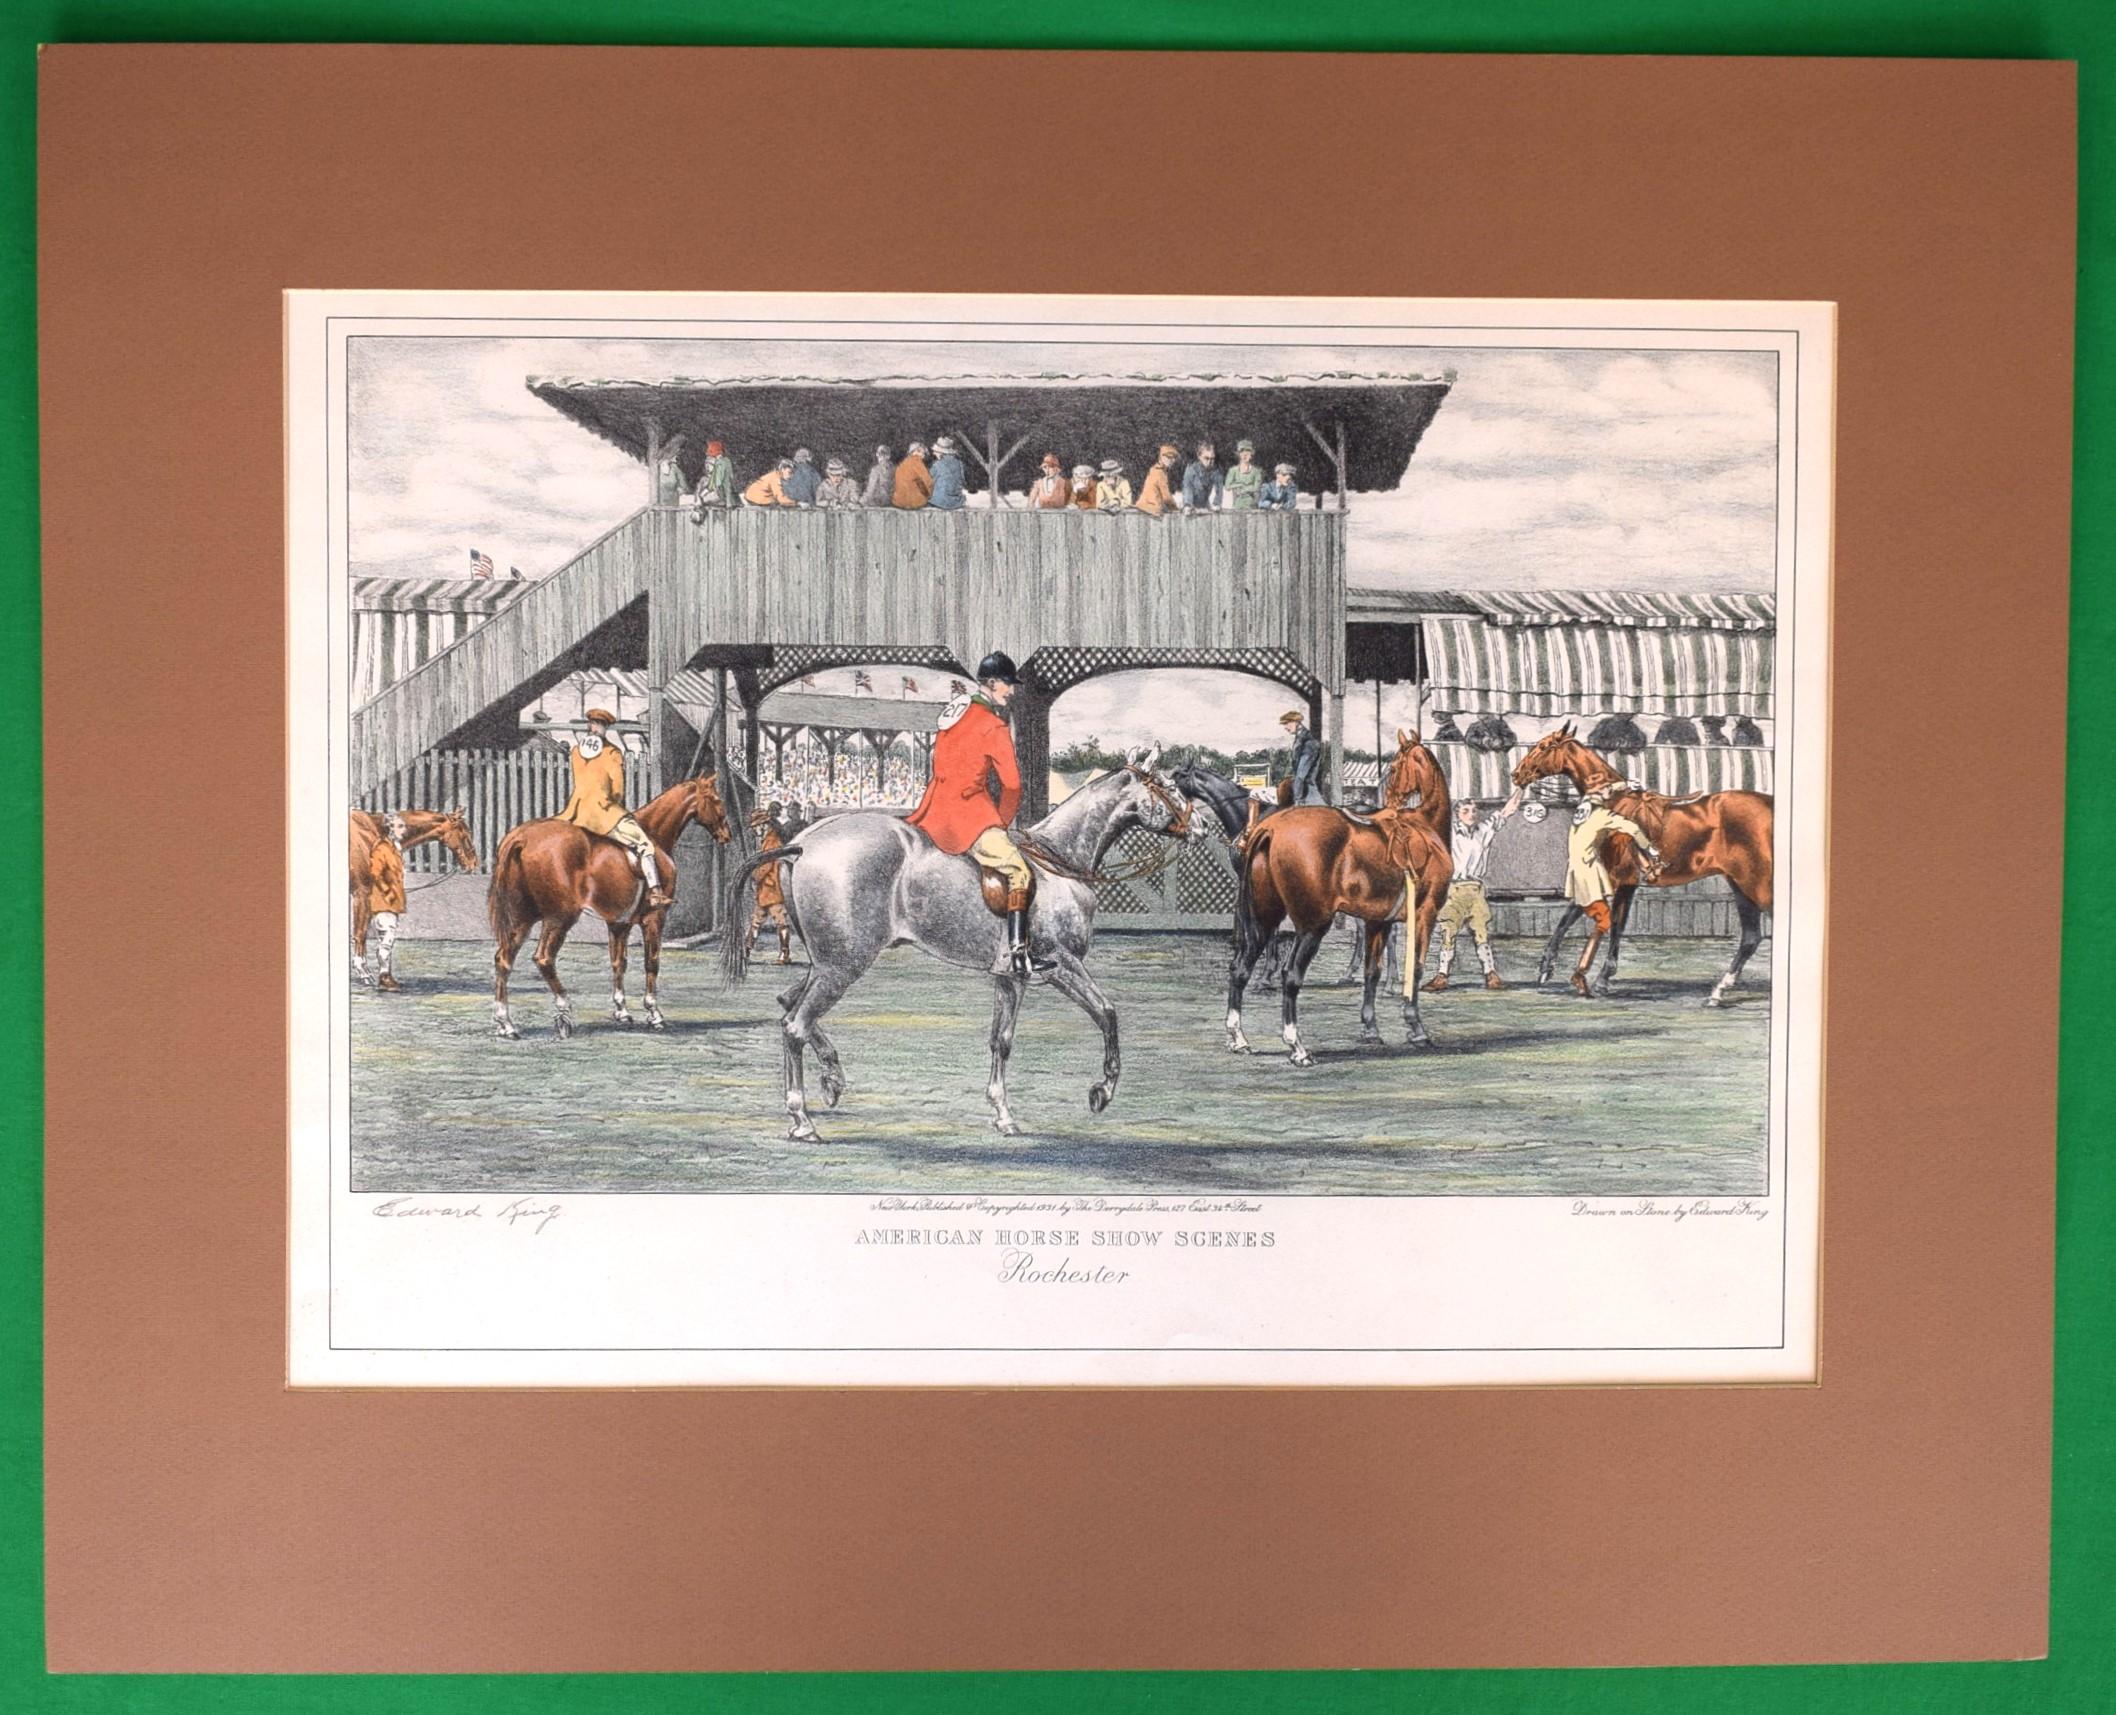 Edward King Lithographie „American Horse Show Scenes, Rochester“, Edward King im Angebot 5